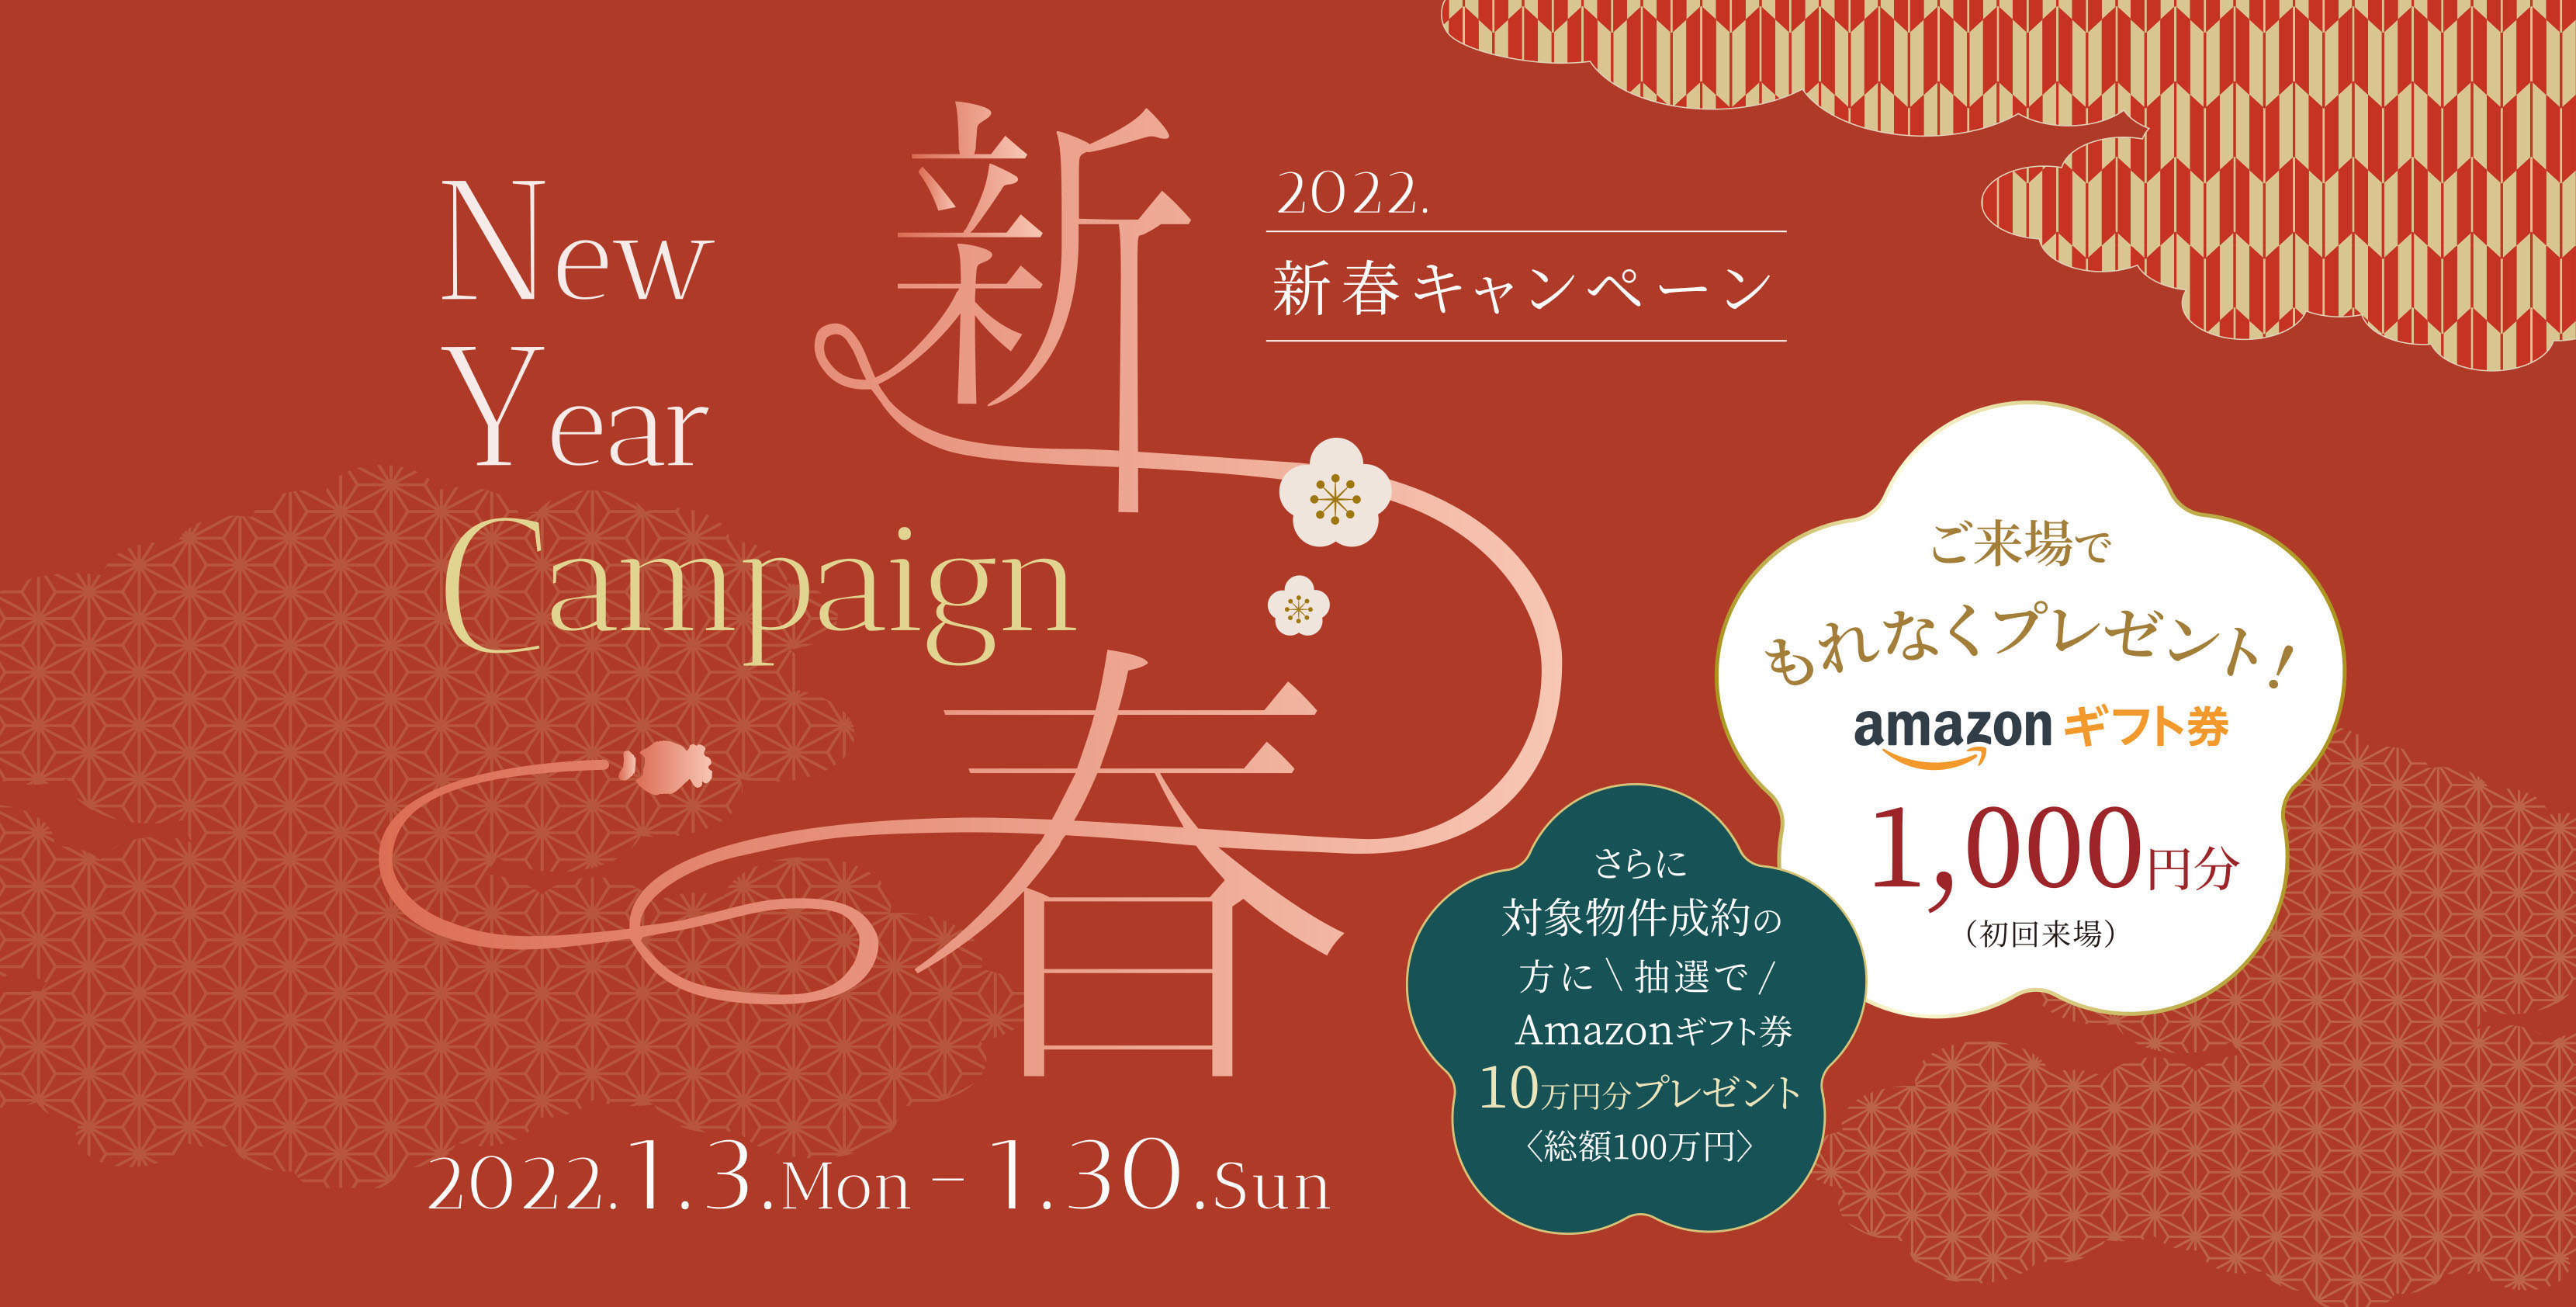 NEW YEAR CAMPAIGN